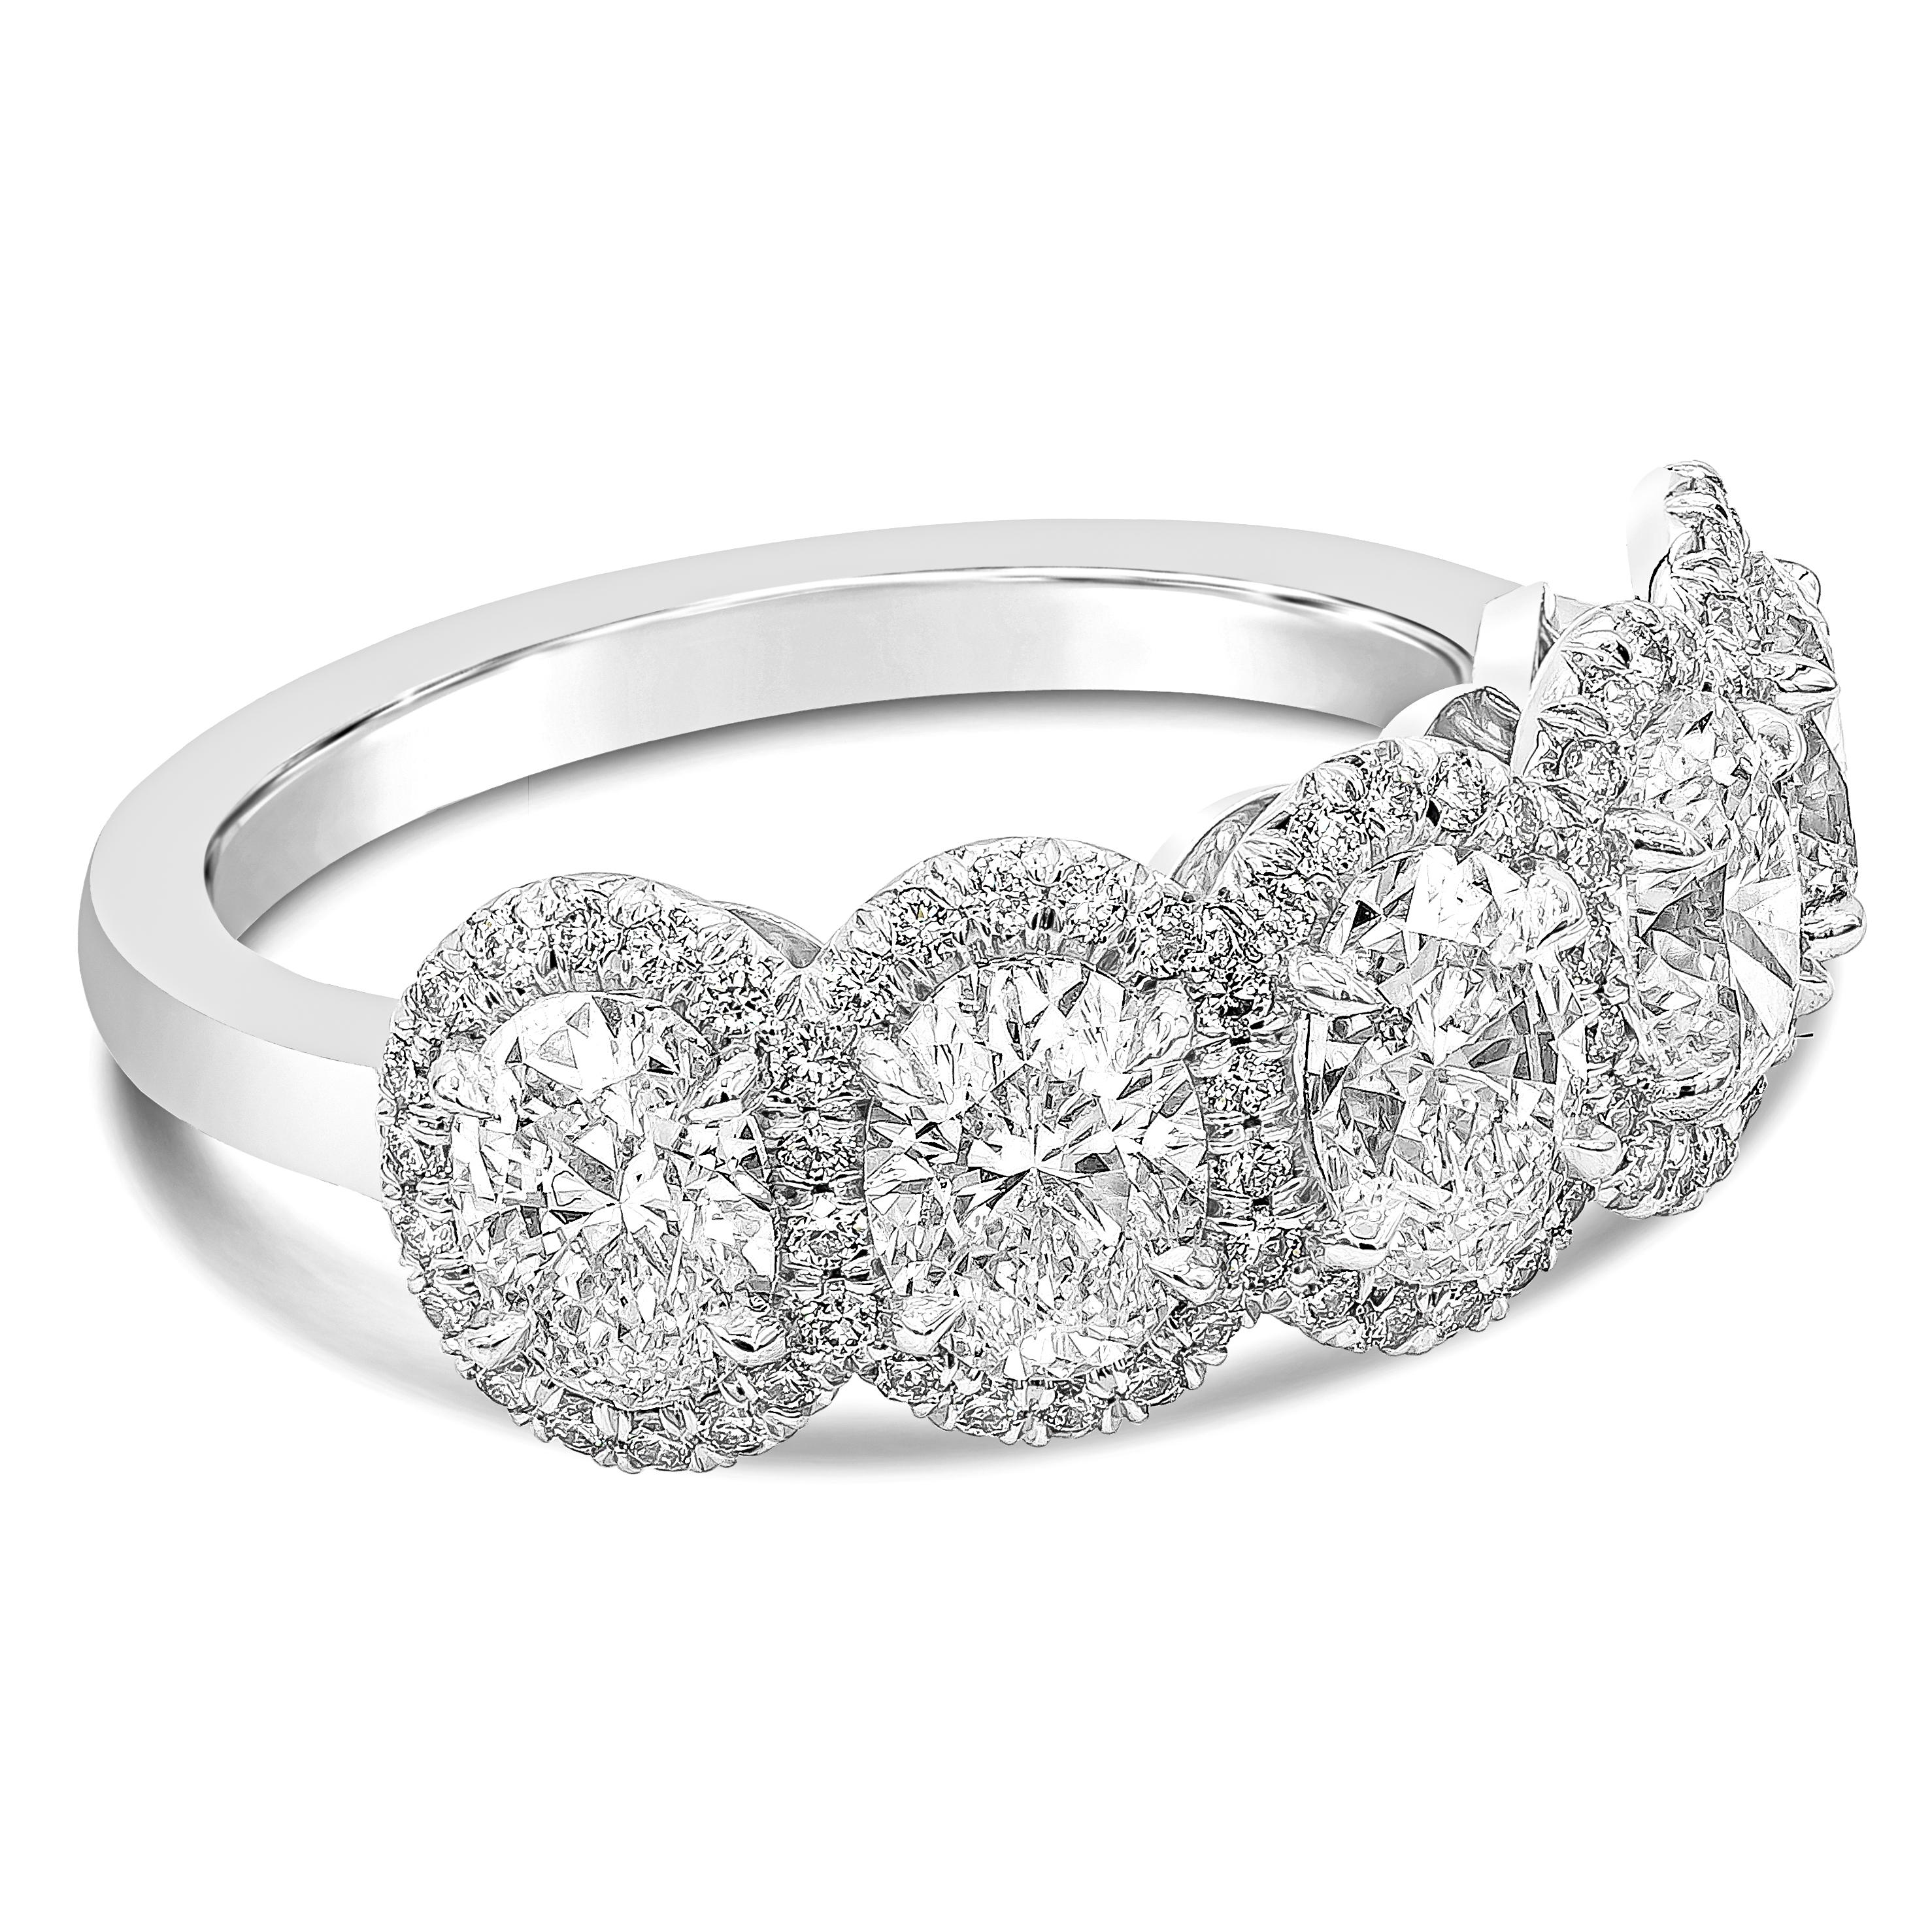 A classic and brilliant wedding band featuring five oval cut diamonds weighing 2.63 carats total, G color, VS in clarity. Set in a platinum four prong basket setting and each oval cut diamonds are surrounded by brilliant round diamonds weighing 0.38